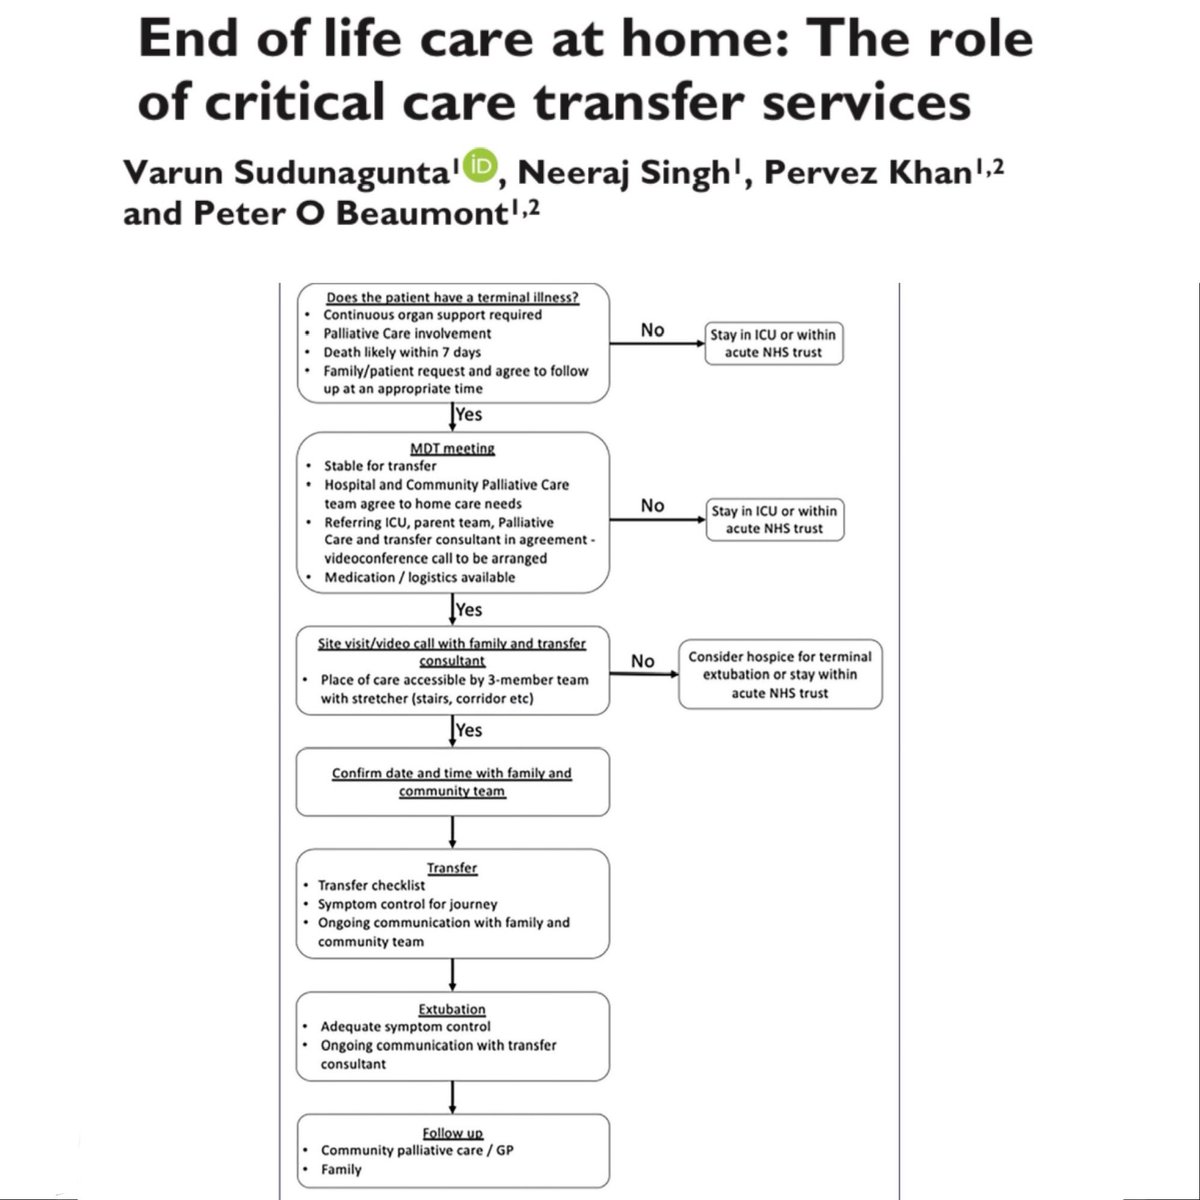 Let’s get our patients who cannot be fixed home safely with the best quality of life possible. 🎩 tip to the authors. eddyjoemd.com/foamed/